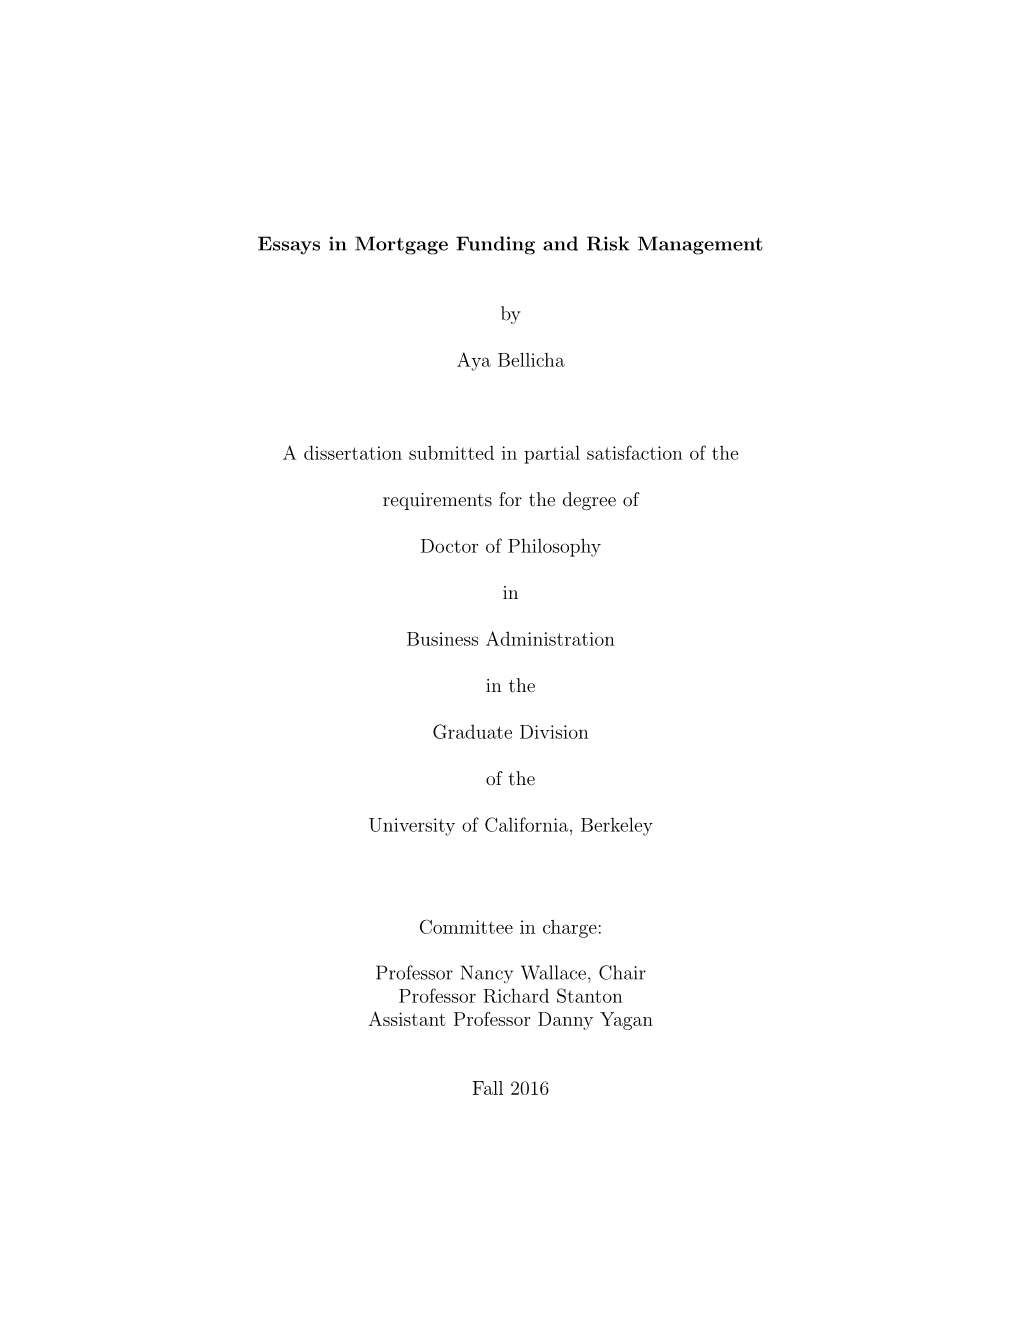 Essays in Mortgage Funding and Risk Management by Aya Bellicha A